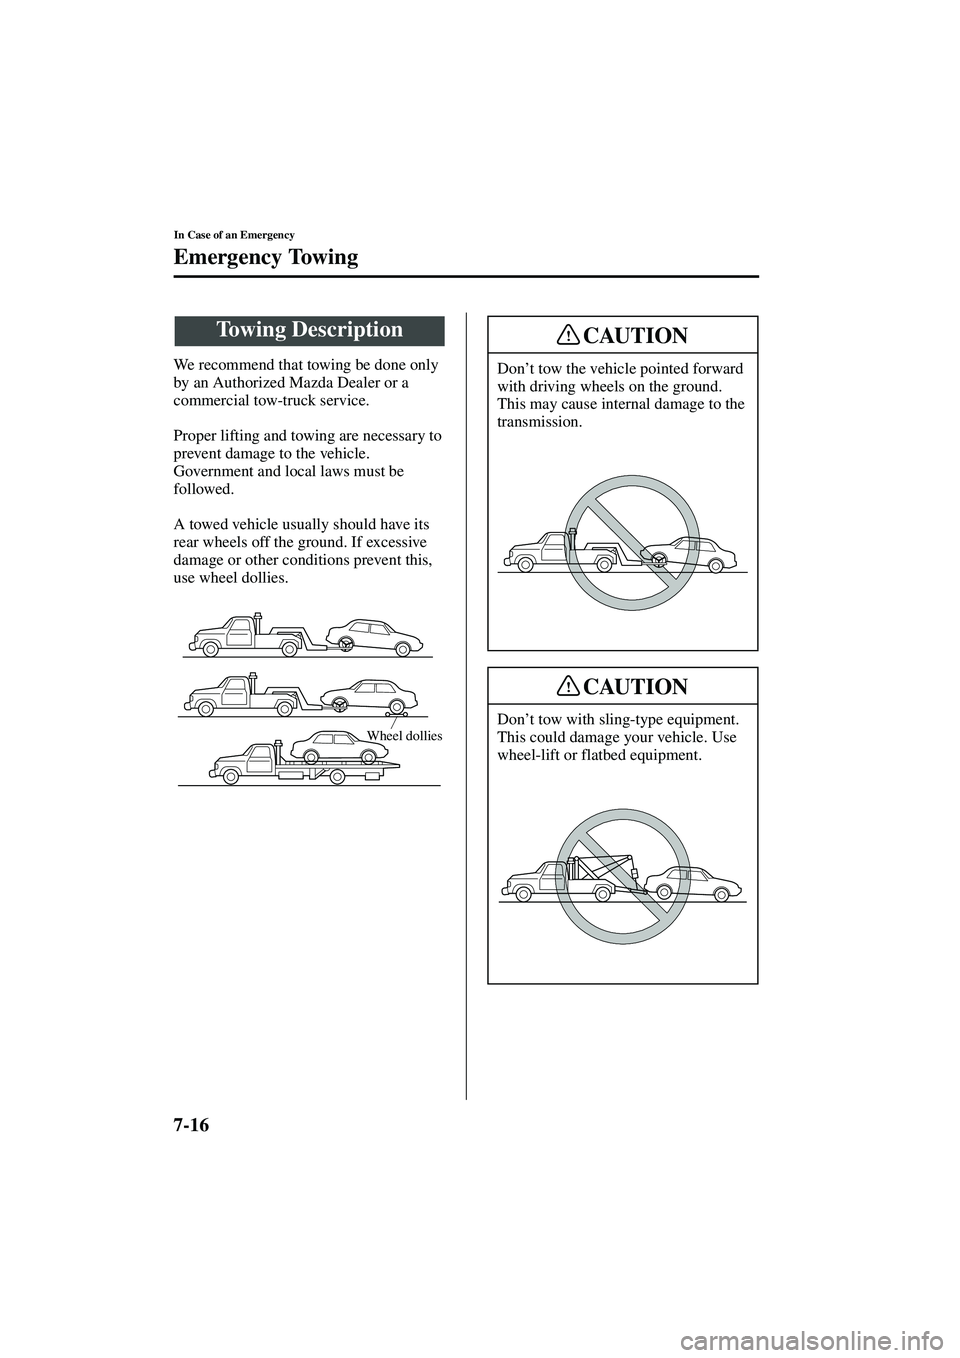 MAZDA MODEL MX-5 MIATA 2003 Owners Manual 7-16
In Case of an Emergency
Form No. 8R09-EA-02G
Emergency Towing
We recommend that towing be done only 
by an Authorized Mazda Dealer or a 
commercial tow-truck service.
Proper lifting and towing ar